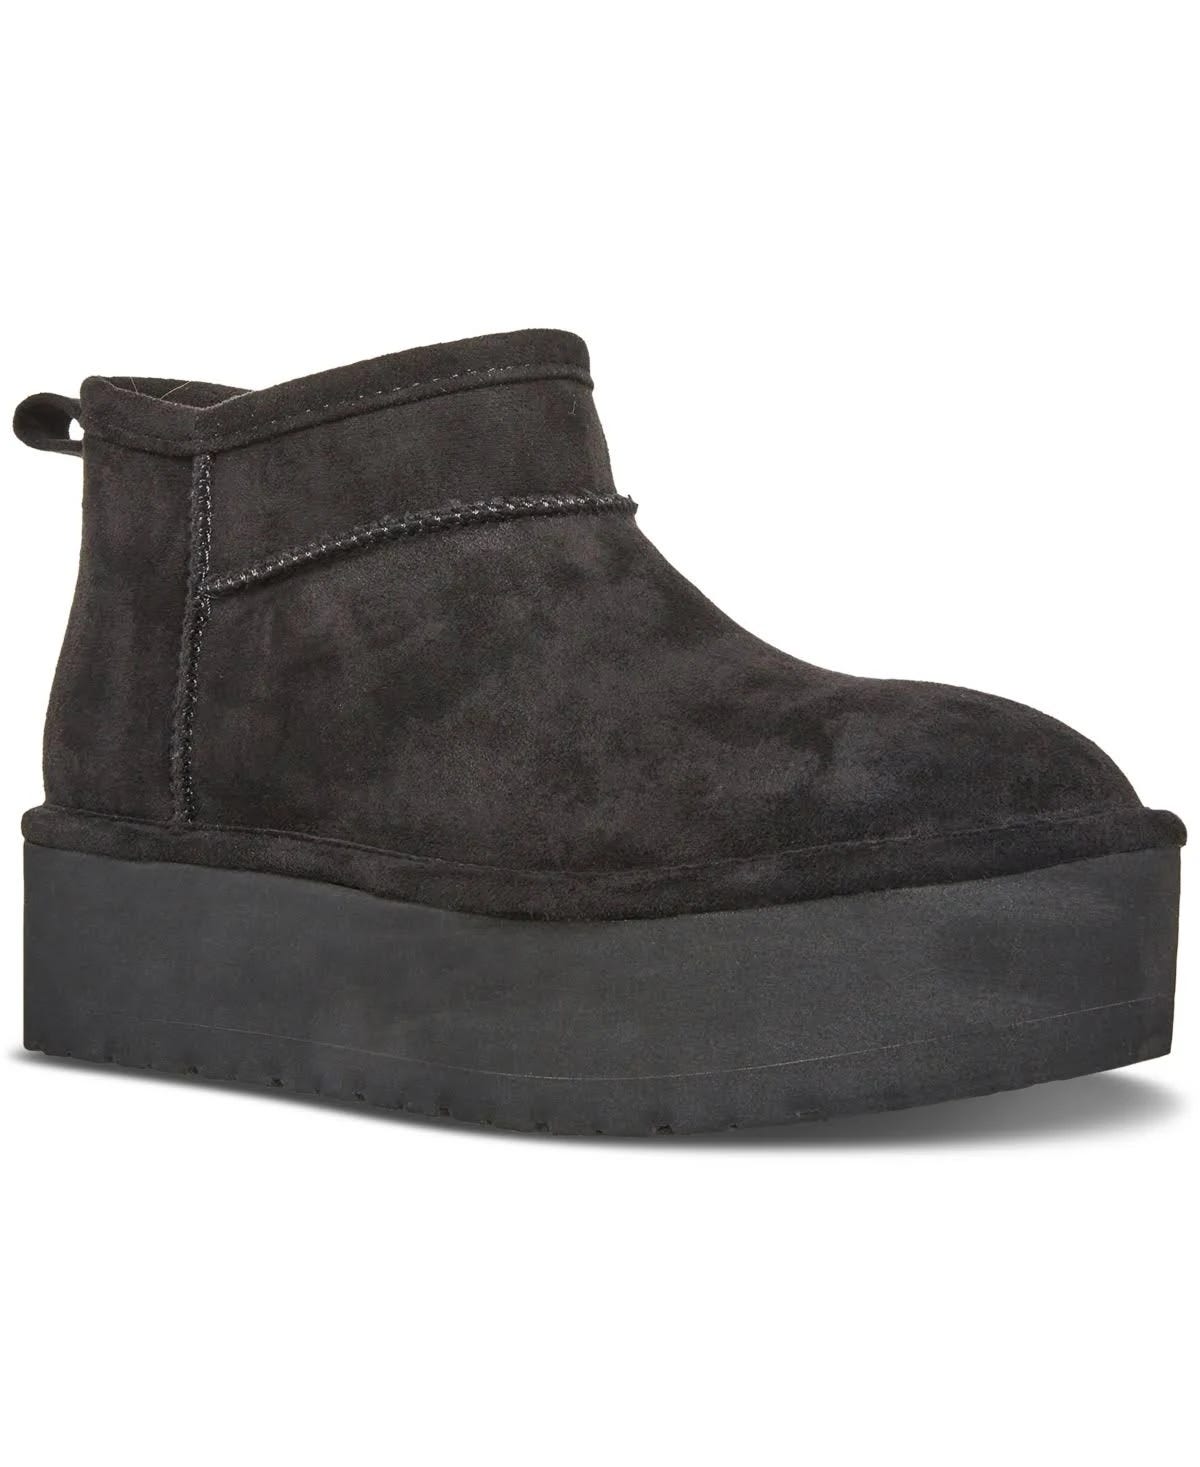 Madden Girl's Comforting Shearling-Lined Platform Boots | Image